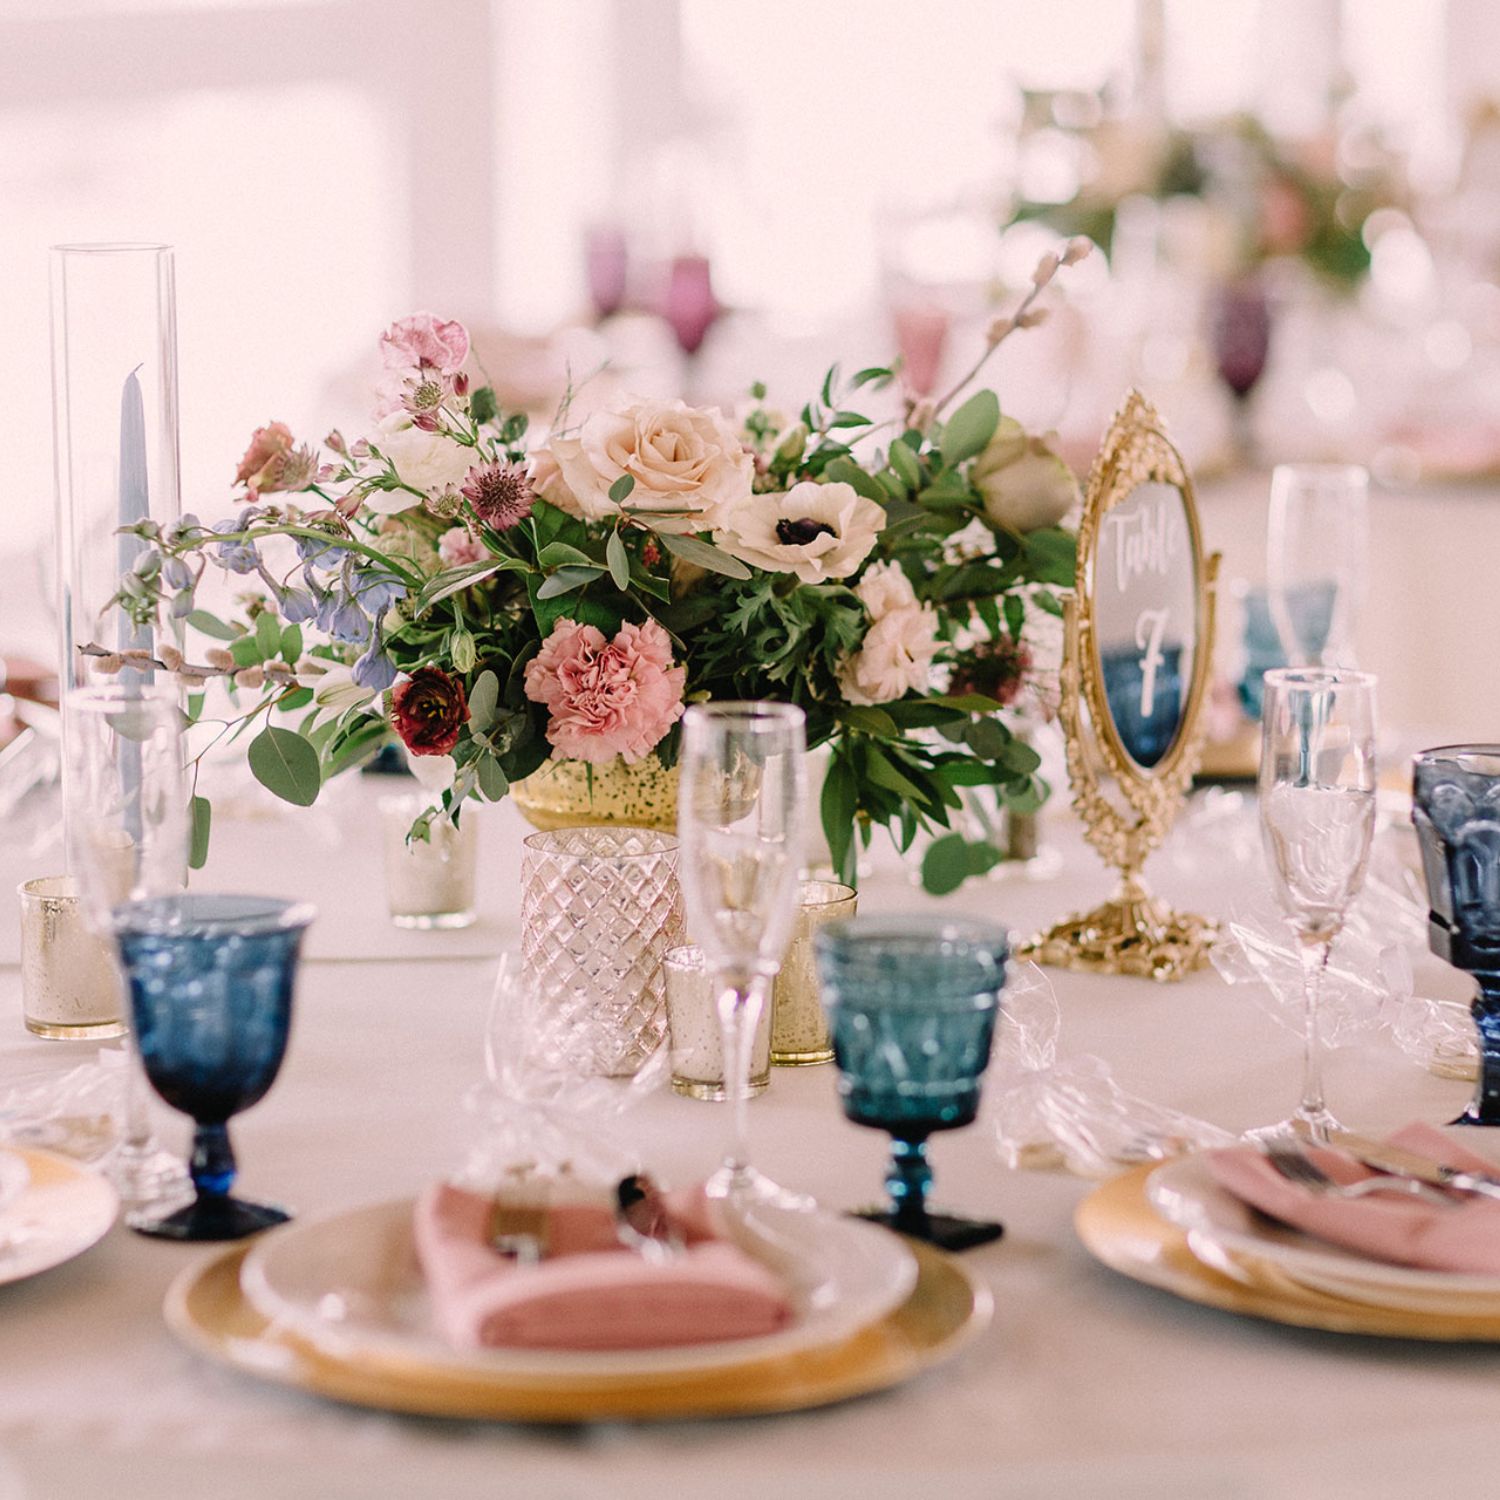 a vase of flowers, champagne glasses, silverware, and plates nicely arranged on a wedding reception table